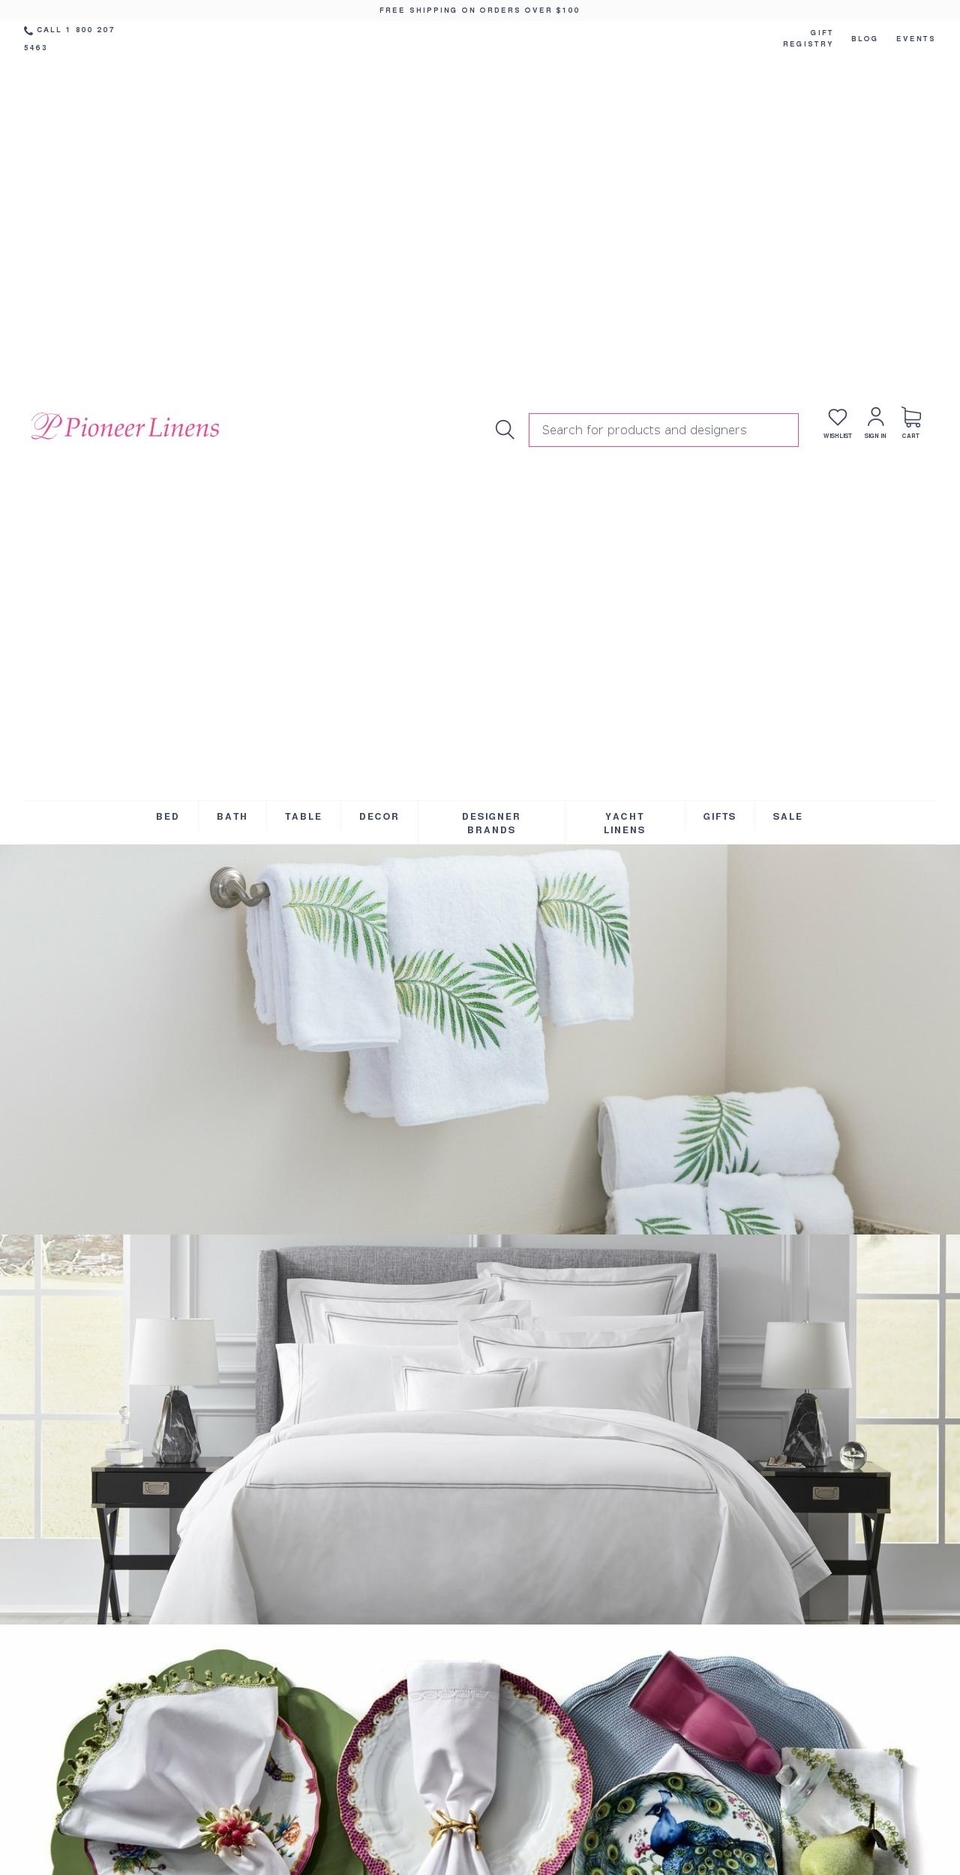 Buko Shopify Theme - Products Consolidation Shopify theme site example pioneerlinen.biz